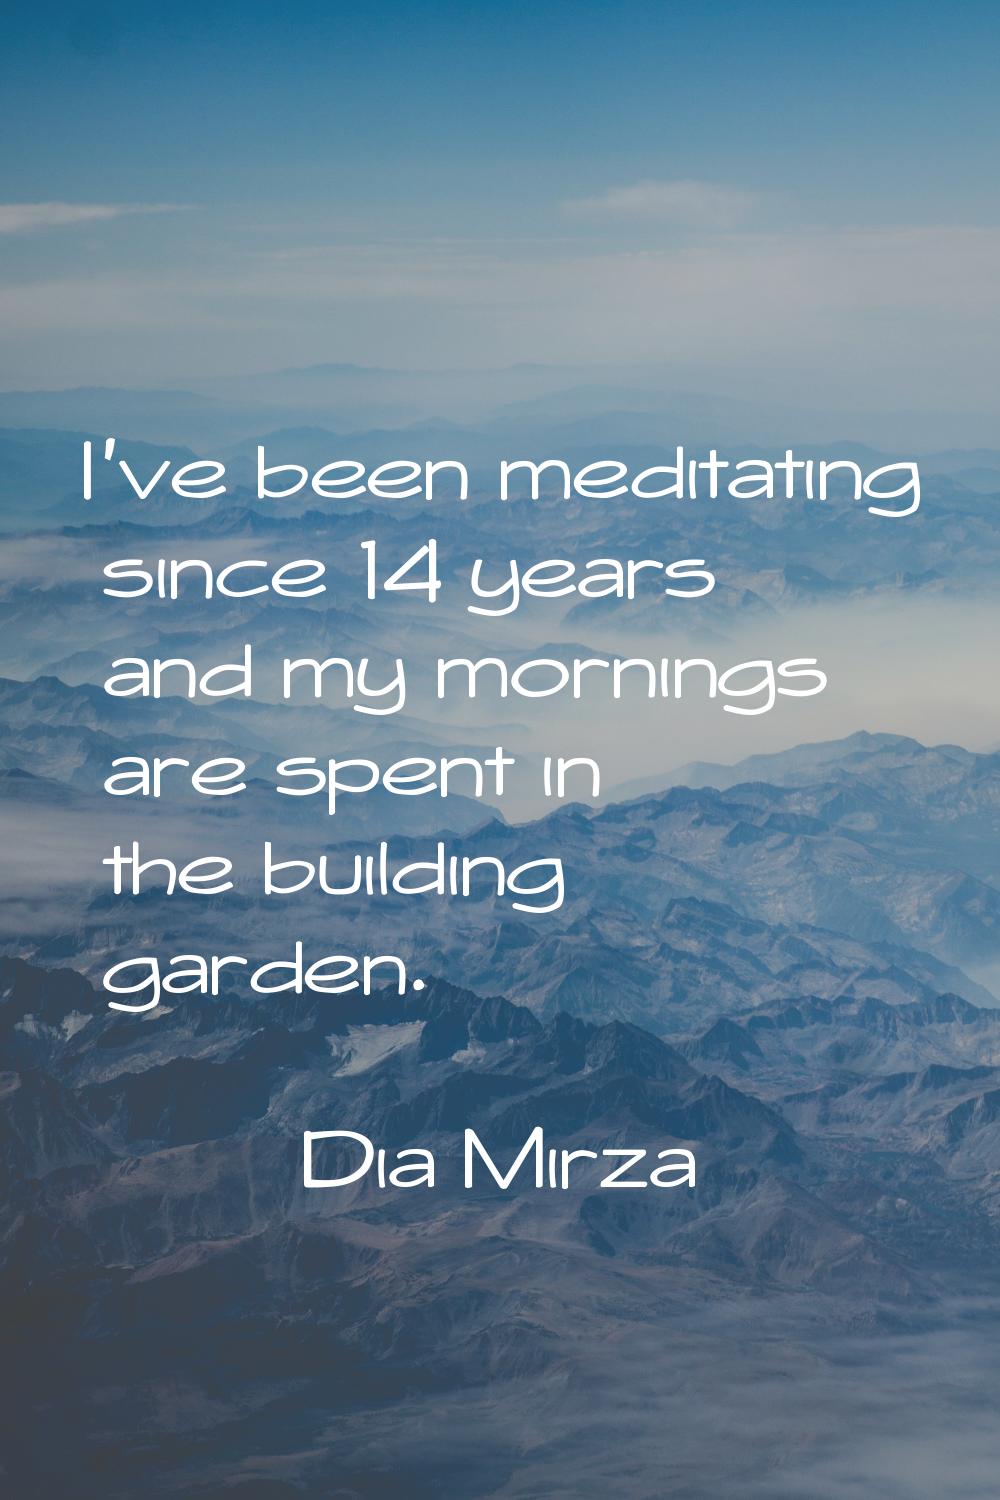 I've been meditating since 14 years and my mornings are spent in the building garden.